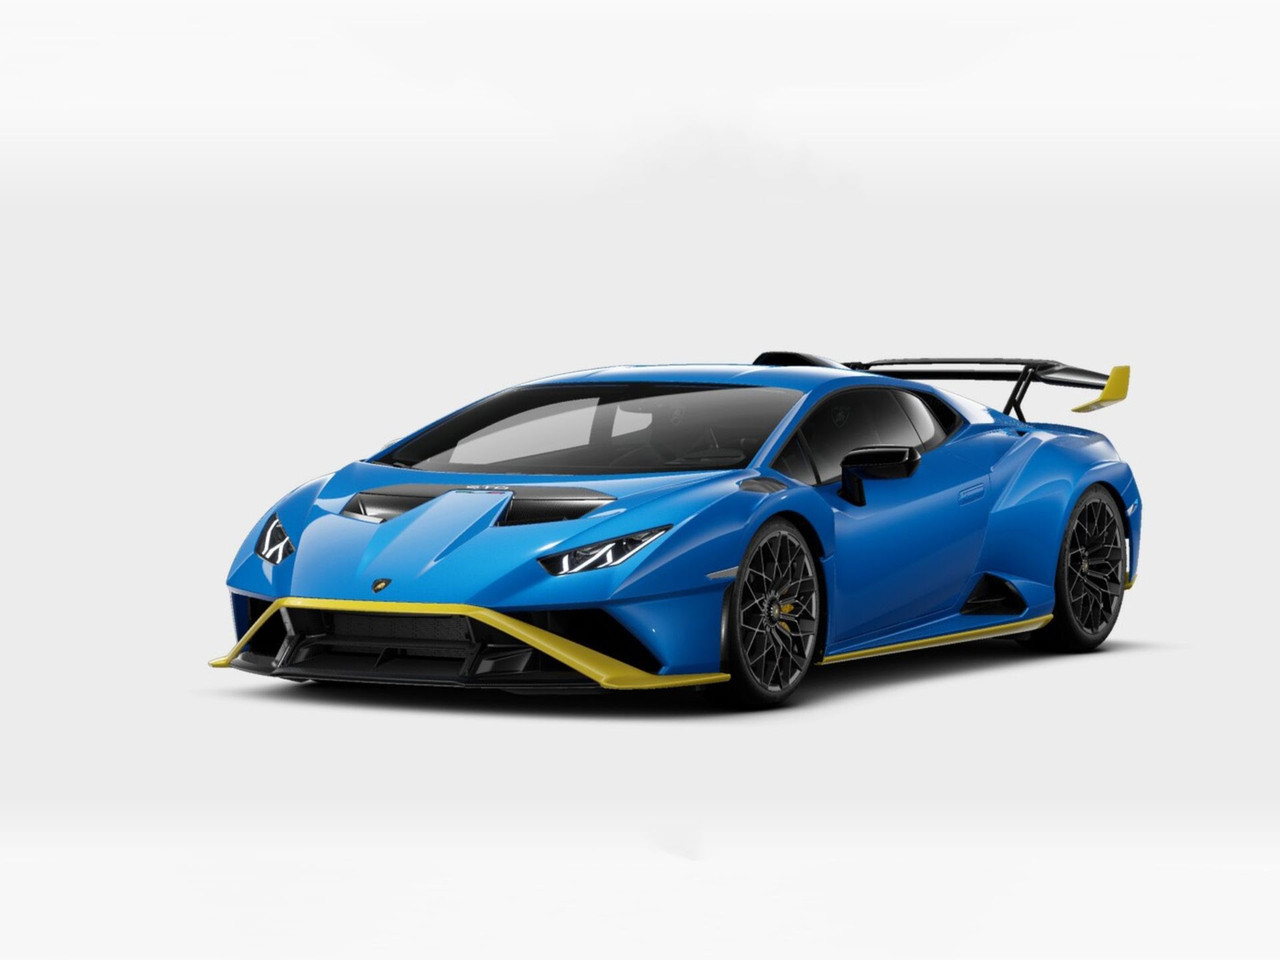 1/18 MR Collection Lamborghini Huracan STO (Blu Nethuns Blue with Giallo Belenus Frames) Resin Car Model Limited 25 Pieces